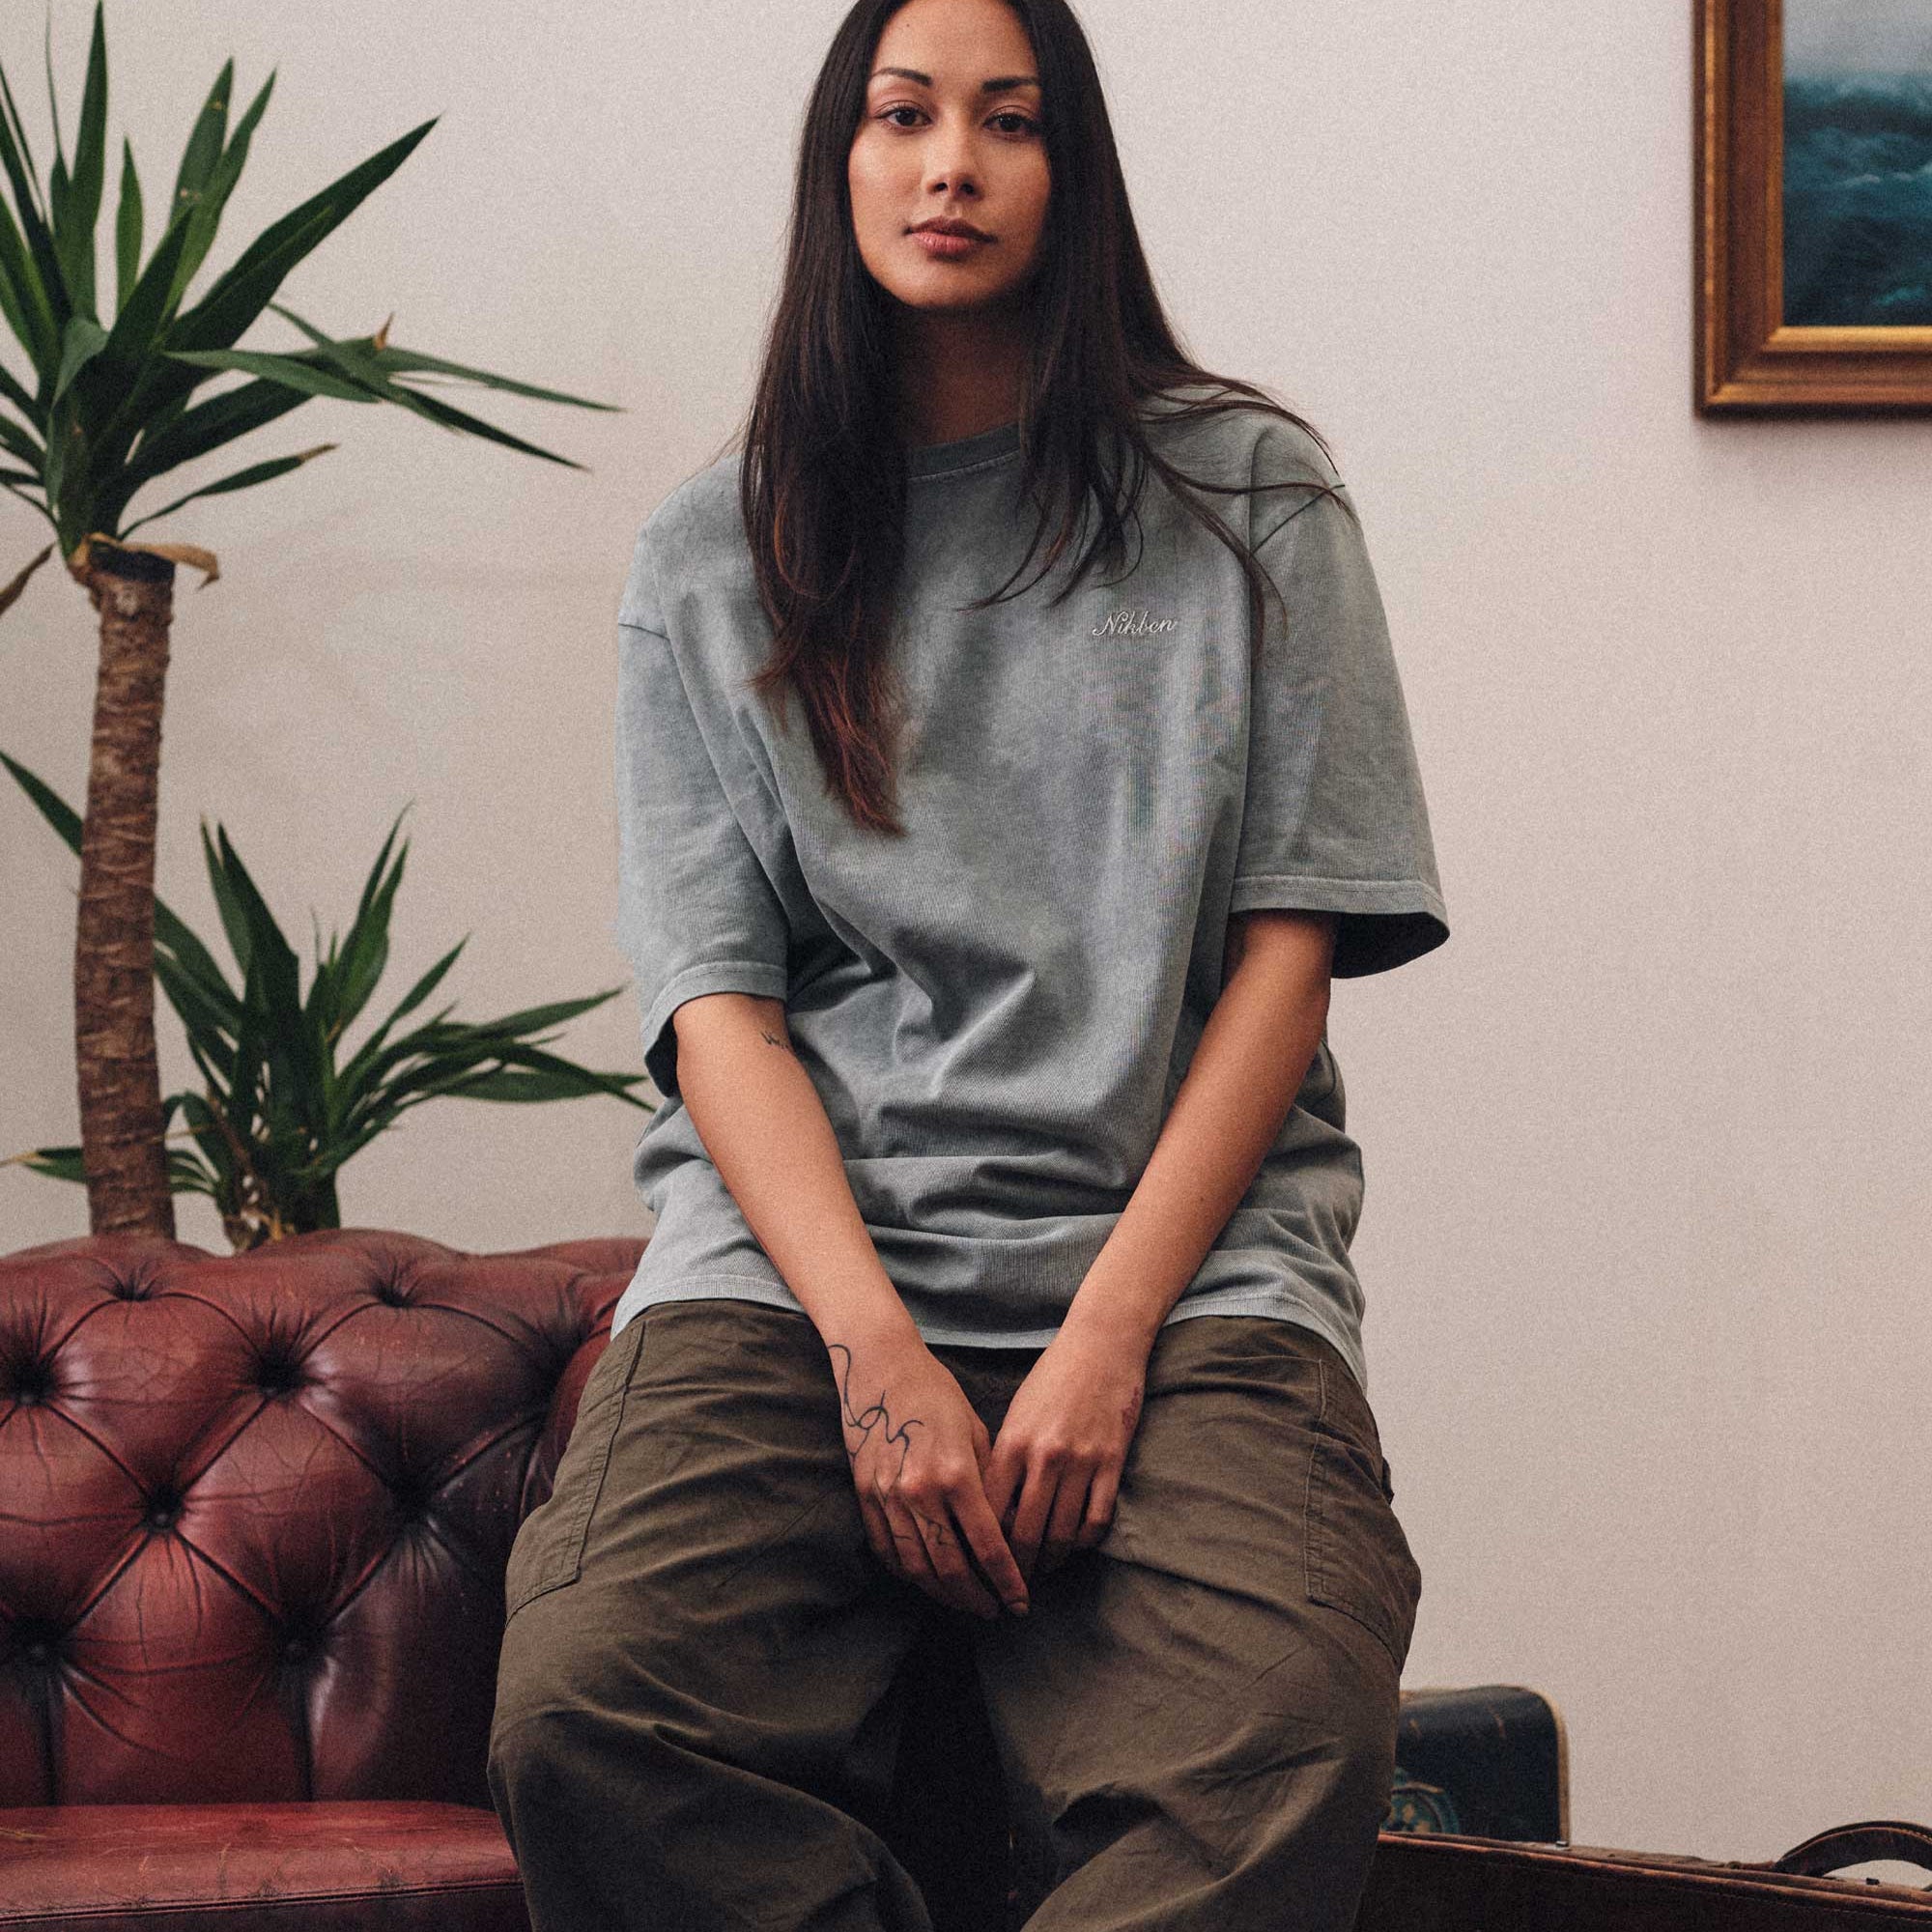 Female model wearing grey t-shirt and brown pants.